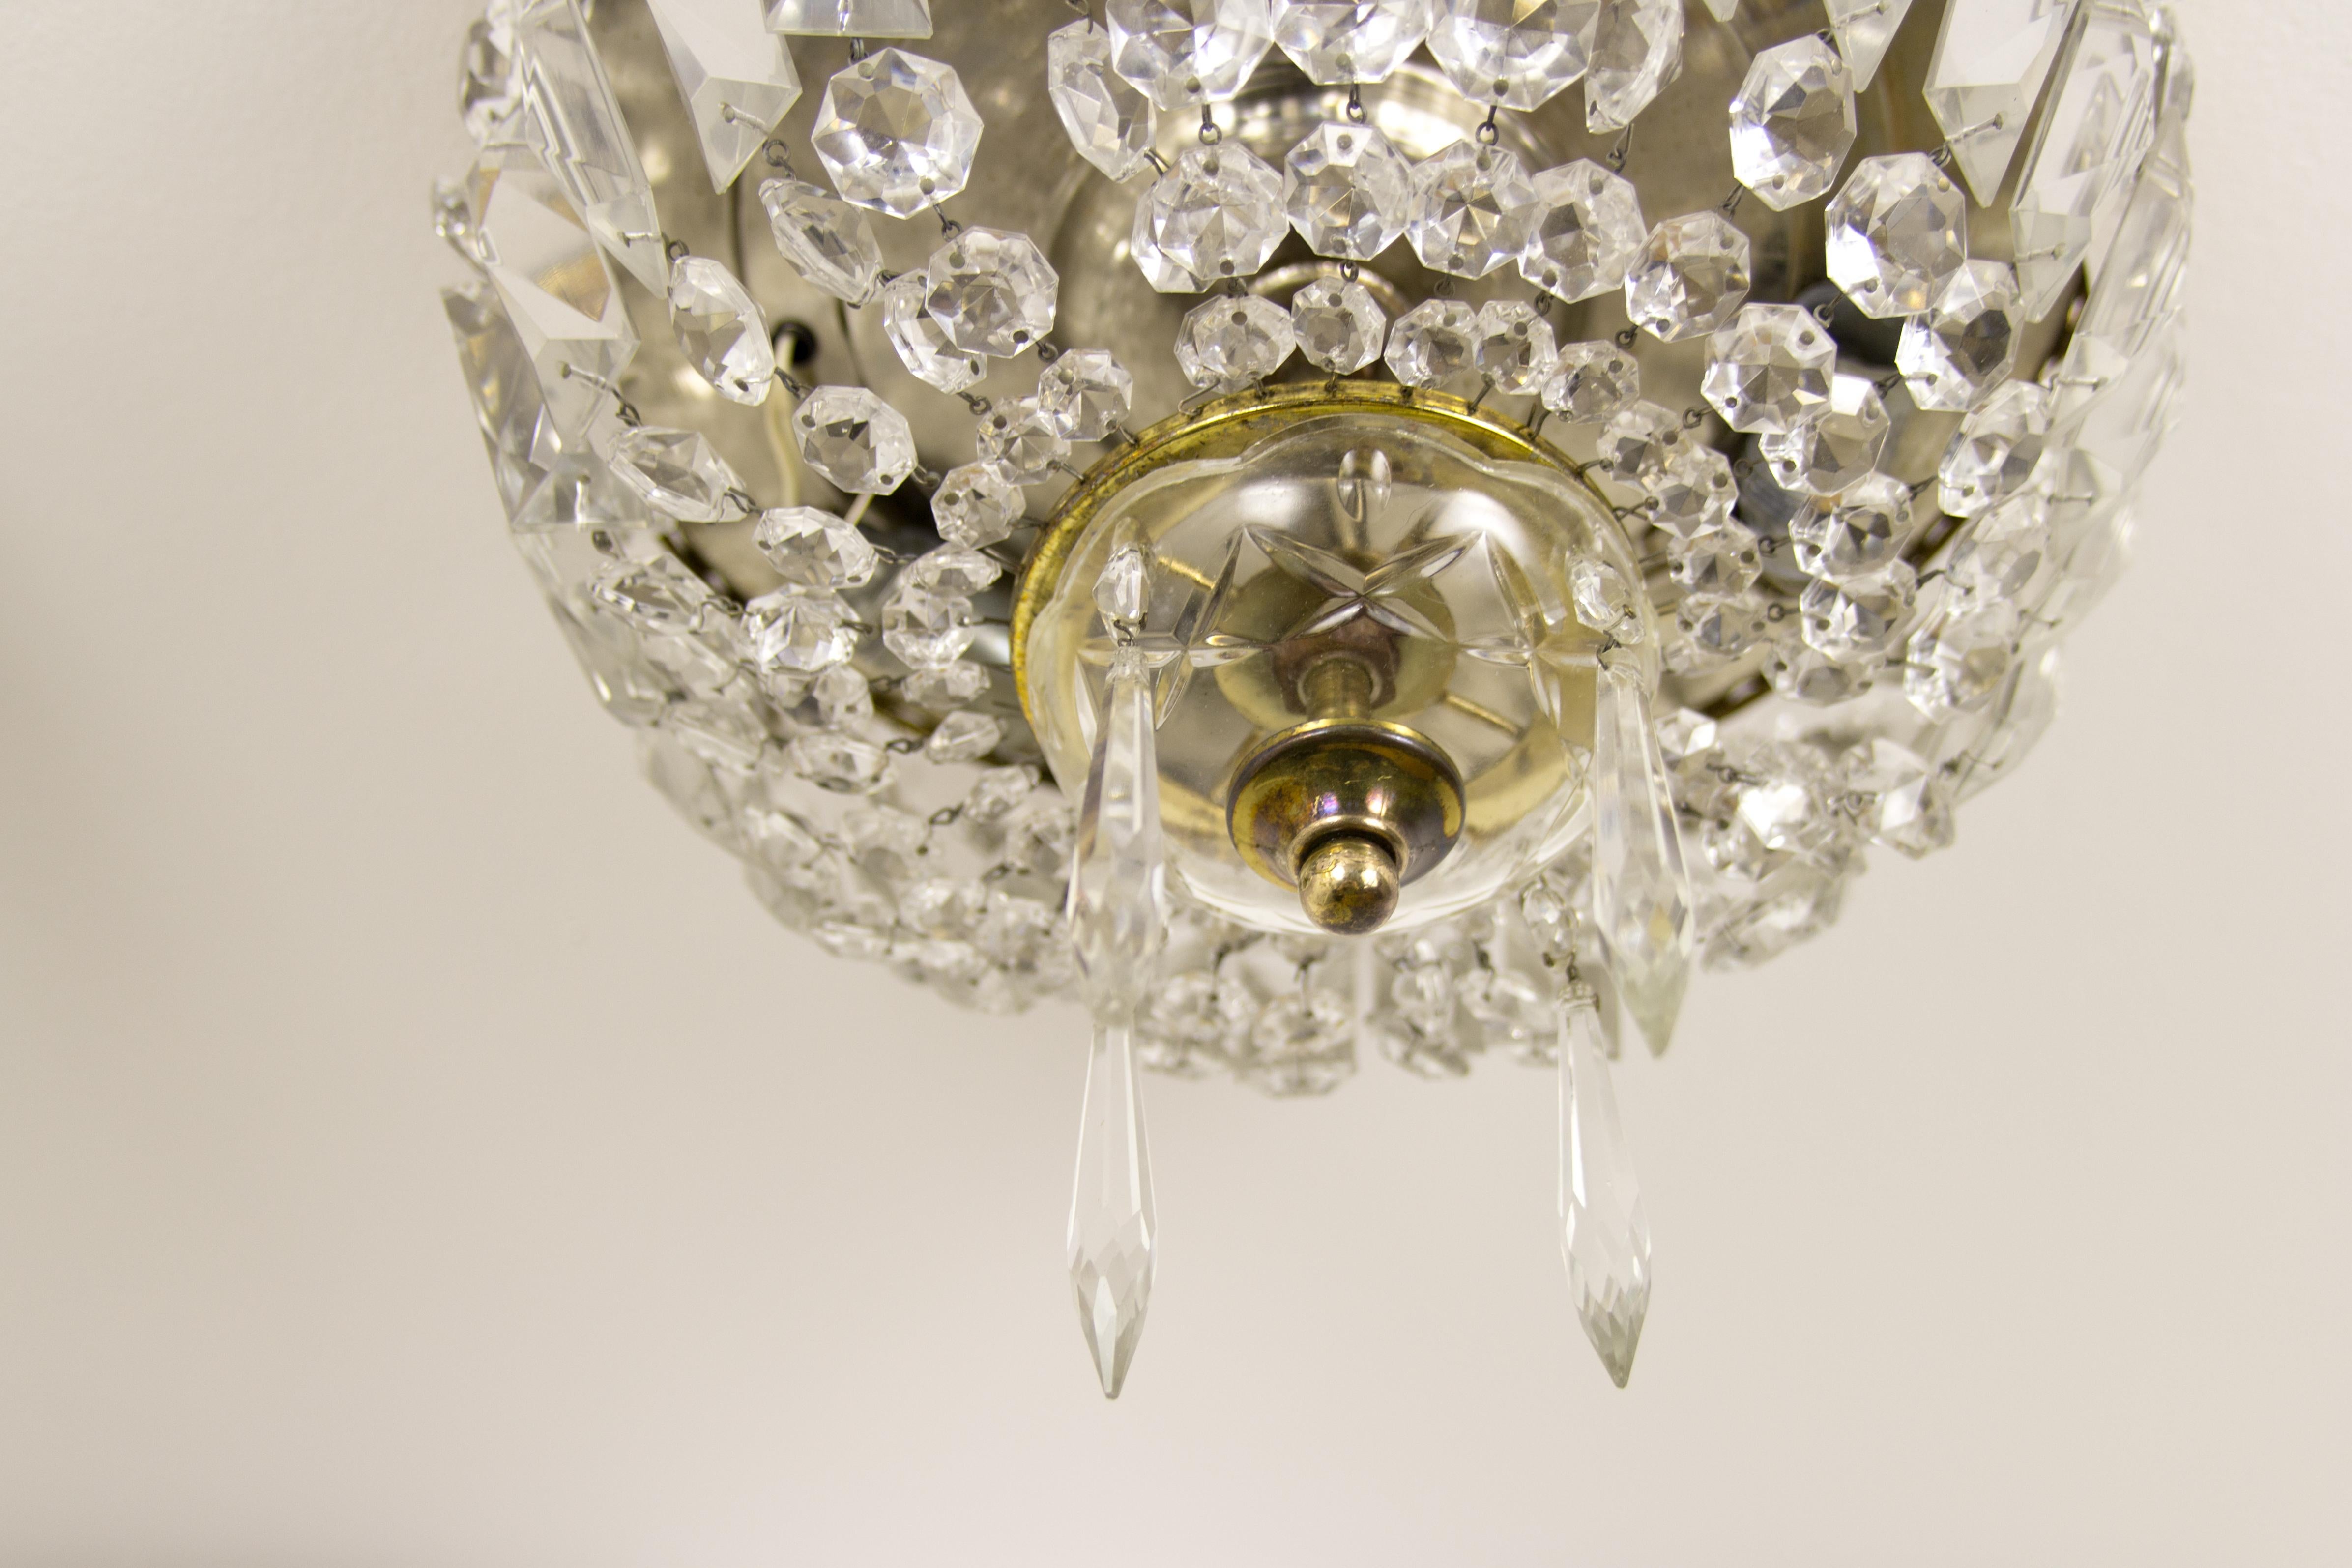 A pair of classic crystal glass and brass ceiling fixtures or flush mounts. Brass fitting decorated with glass diamonds, prism plates and icicles.
The crystal shades will beautifully sparkle when the light is on. These elegant three - light fixtures